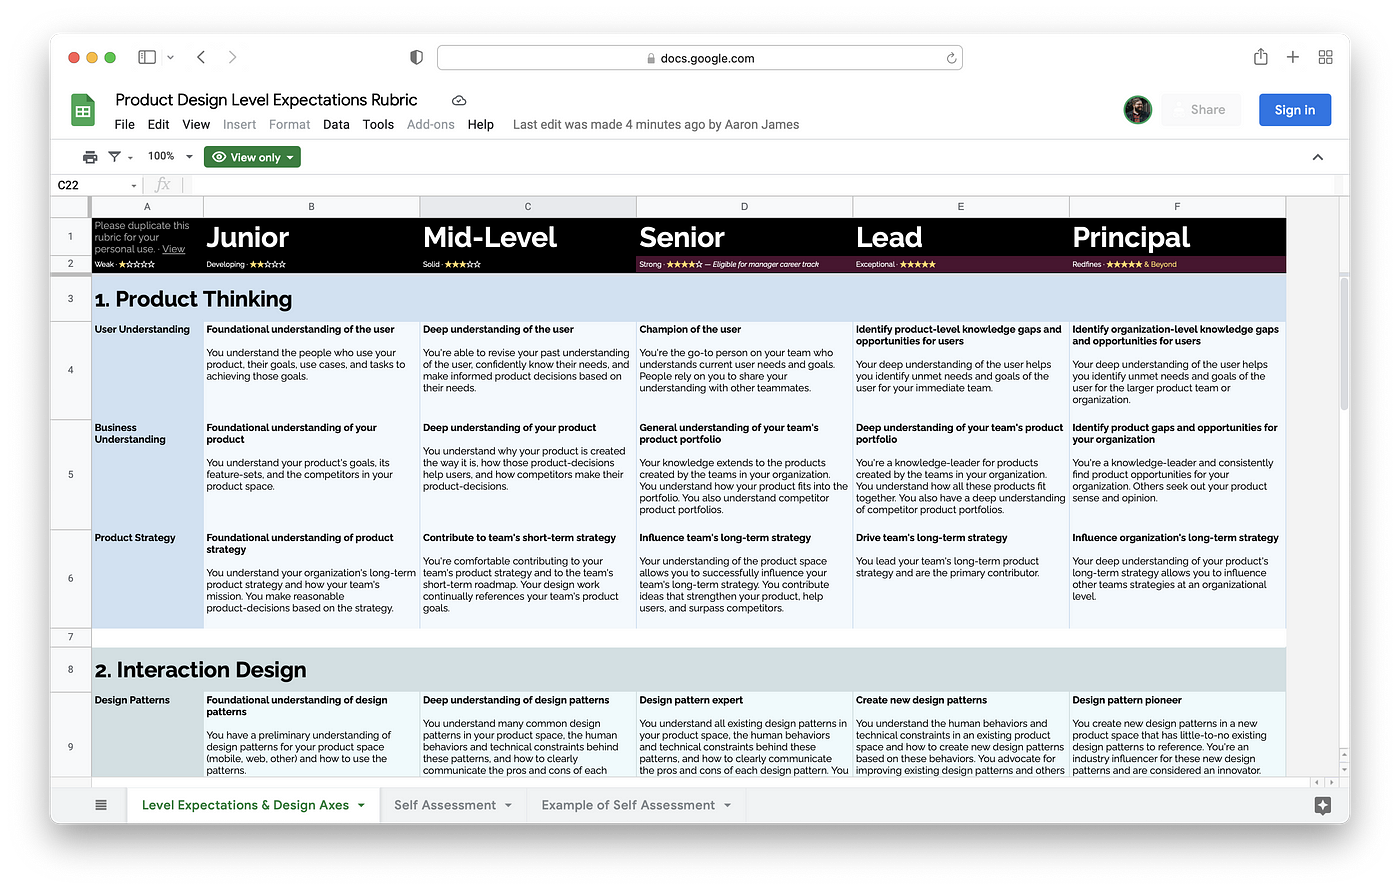 Screenshot of the Product Design Levels Expectation Rubric